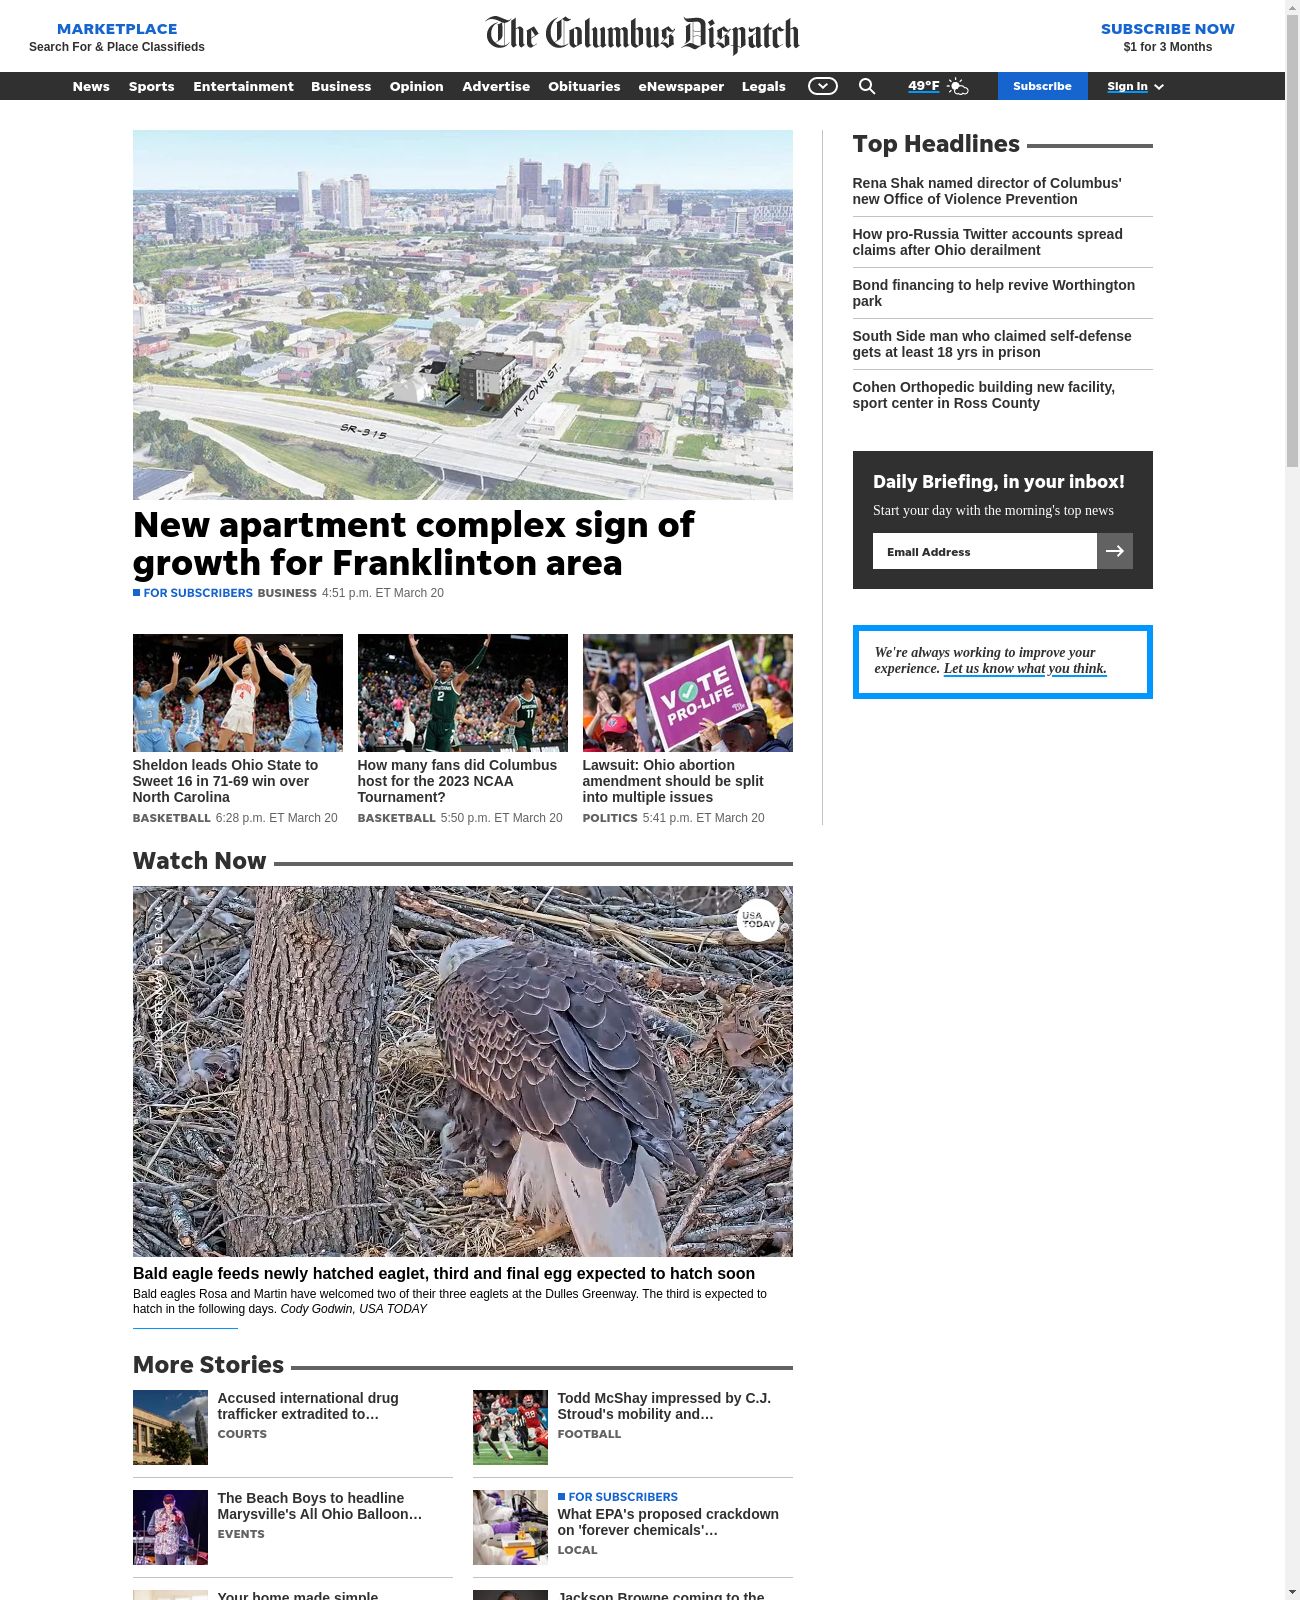 The Columbus Dispatch at 2023-03-20 18:43:56-04:00 local time